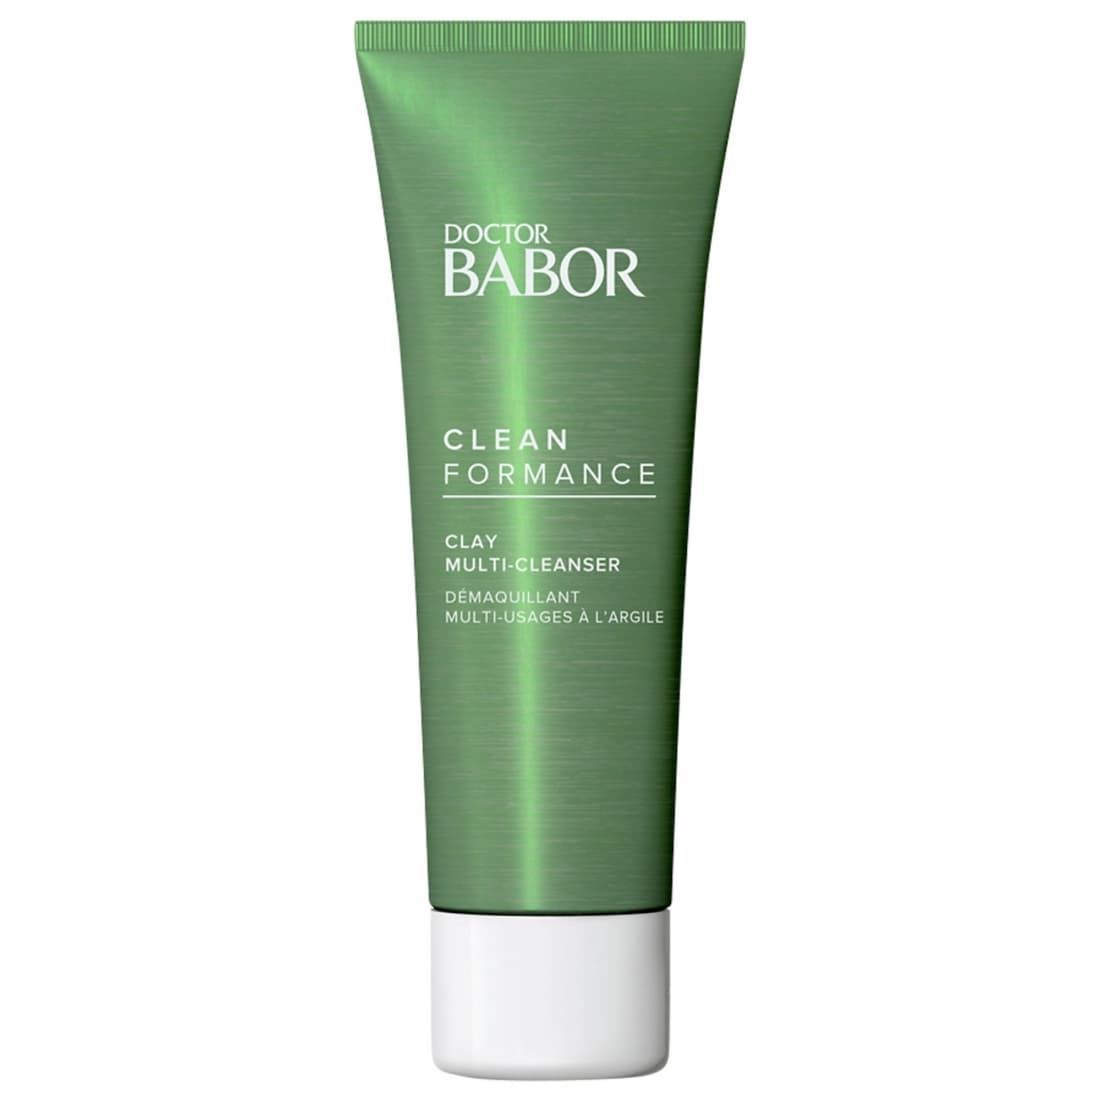 DOCTOR BABOR CLAY MULTI-CLEANSER - Imagen 1